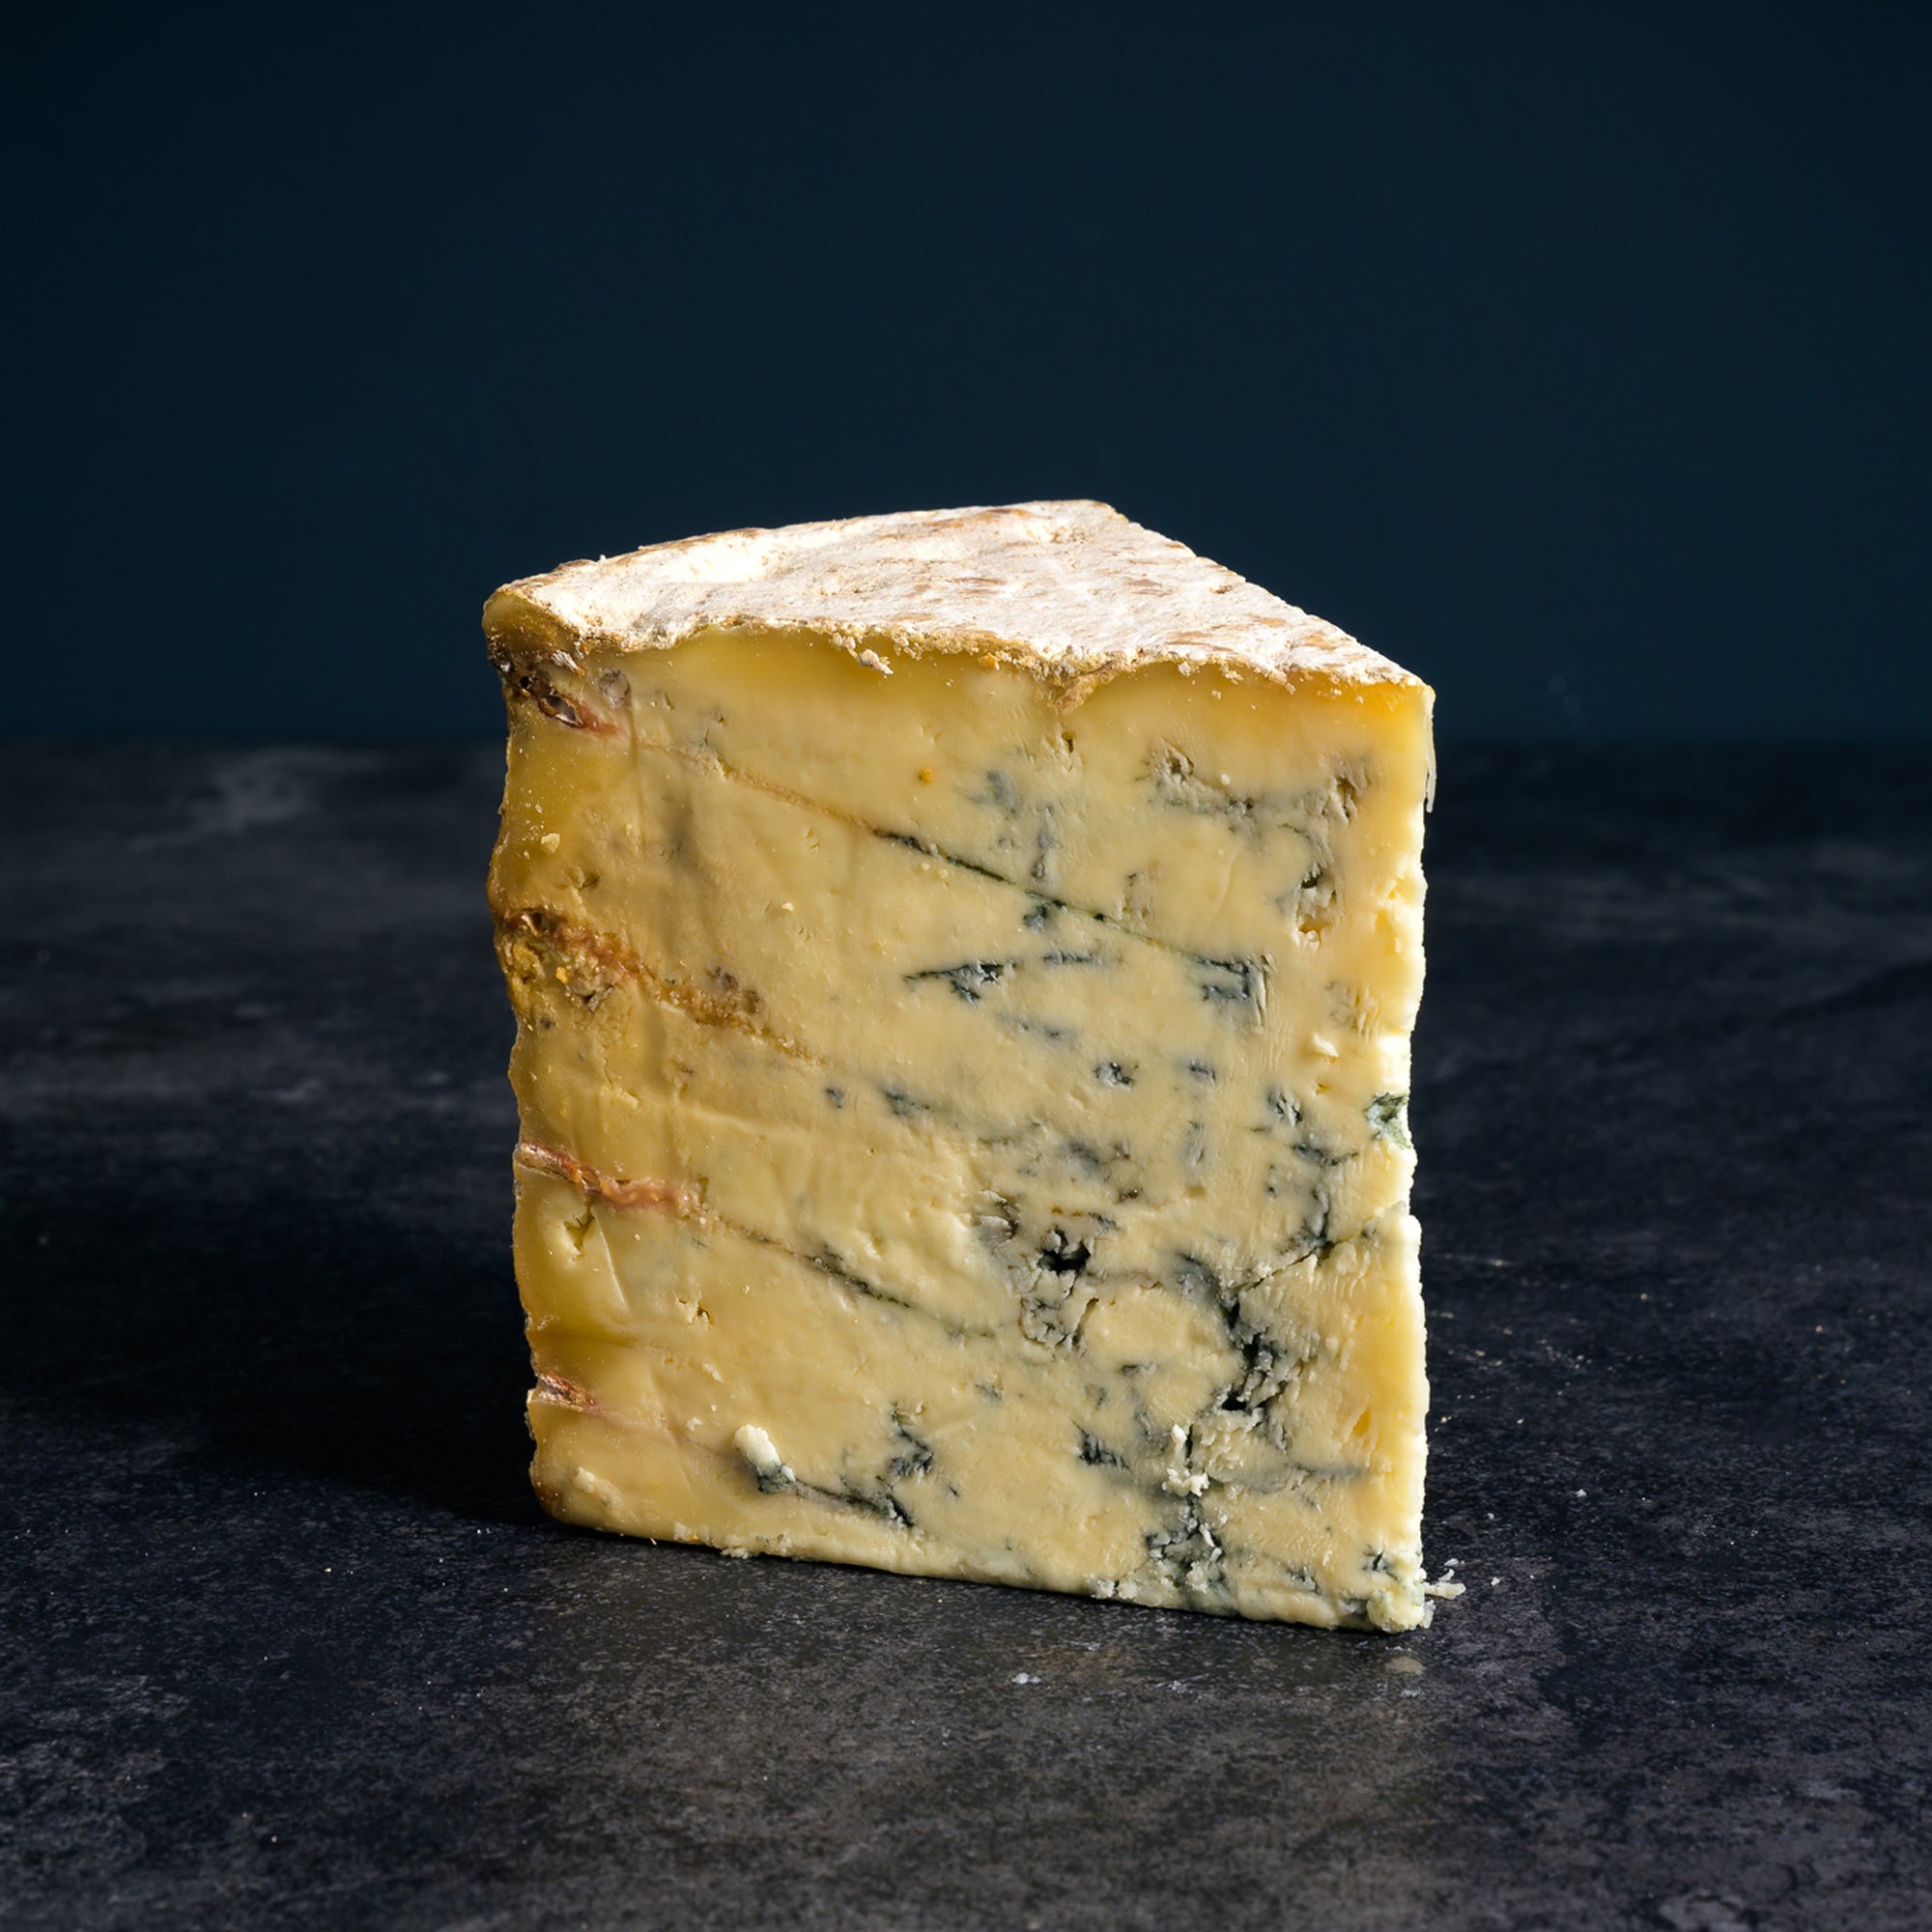 Stichelton Blue Cheese sold by the Trethowan Brothers